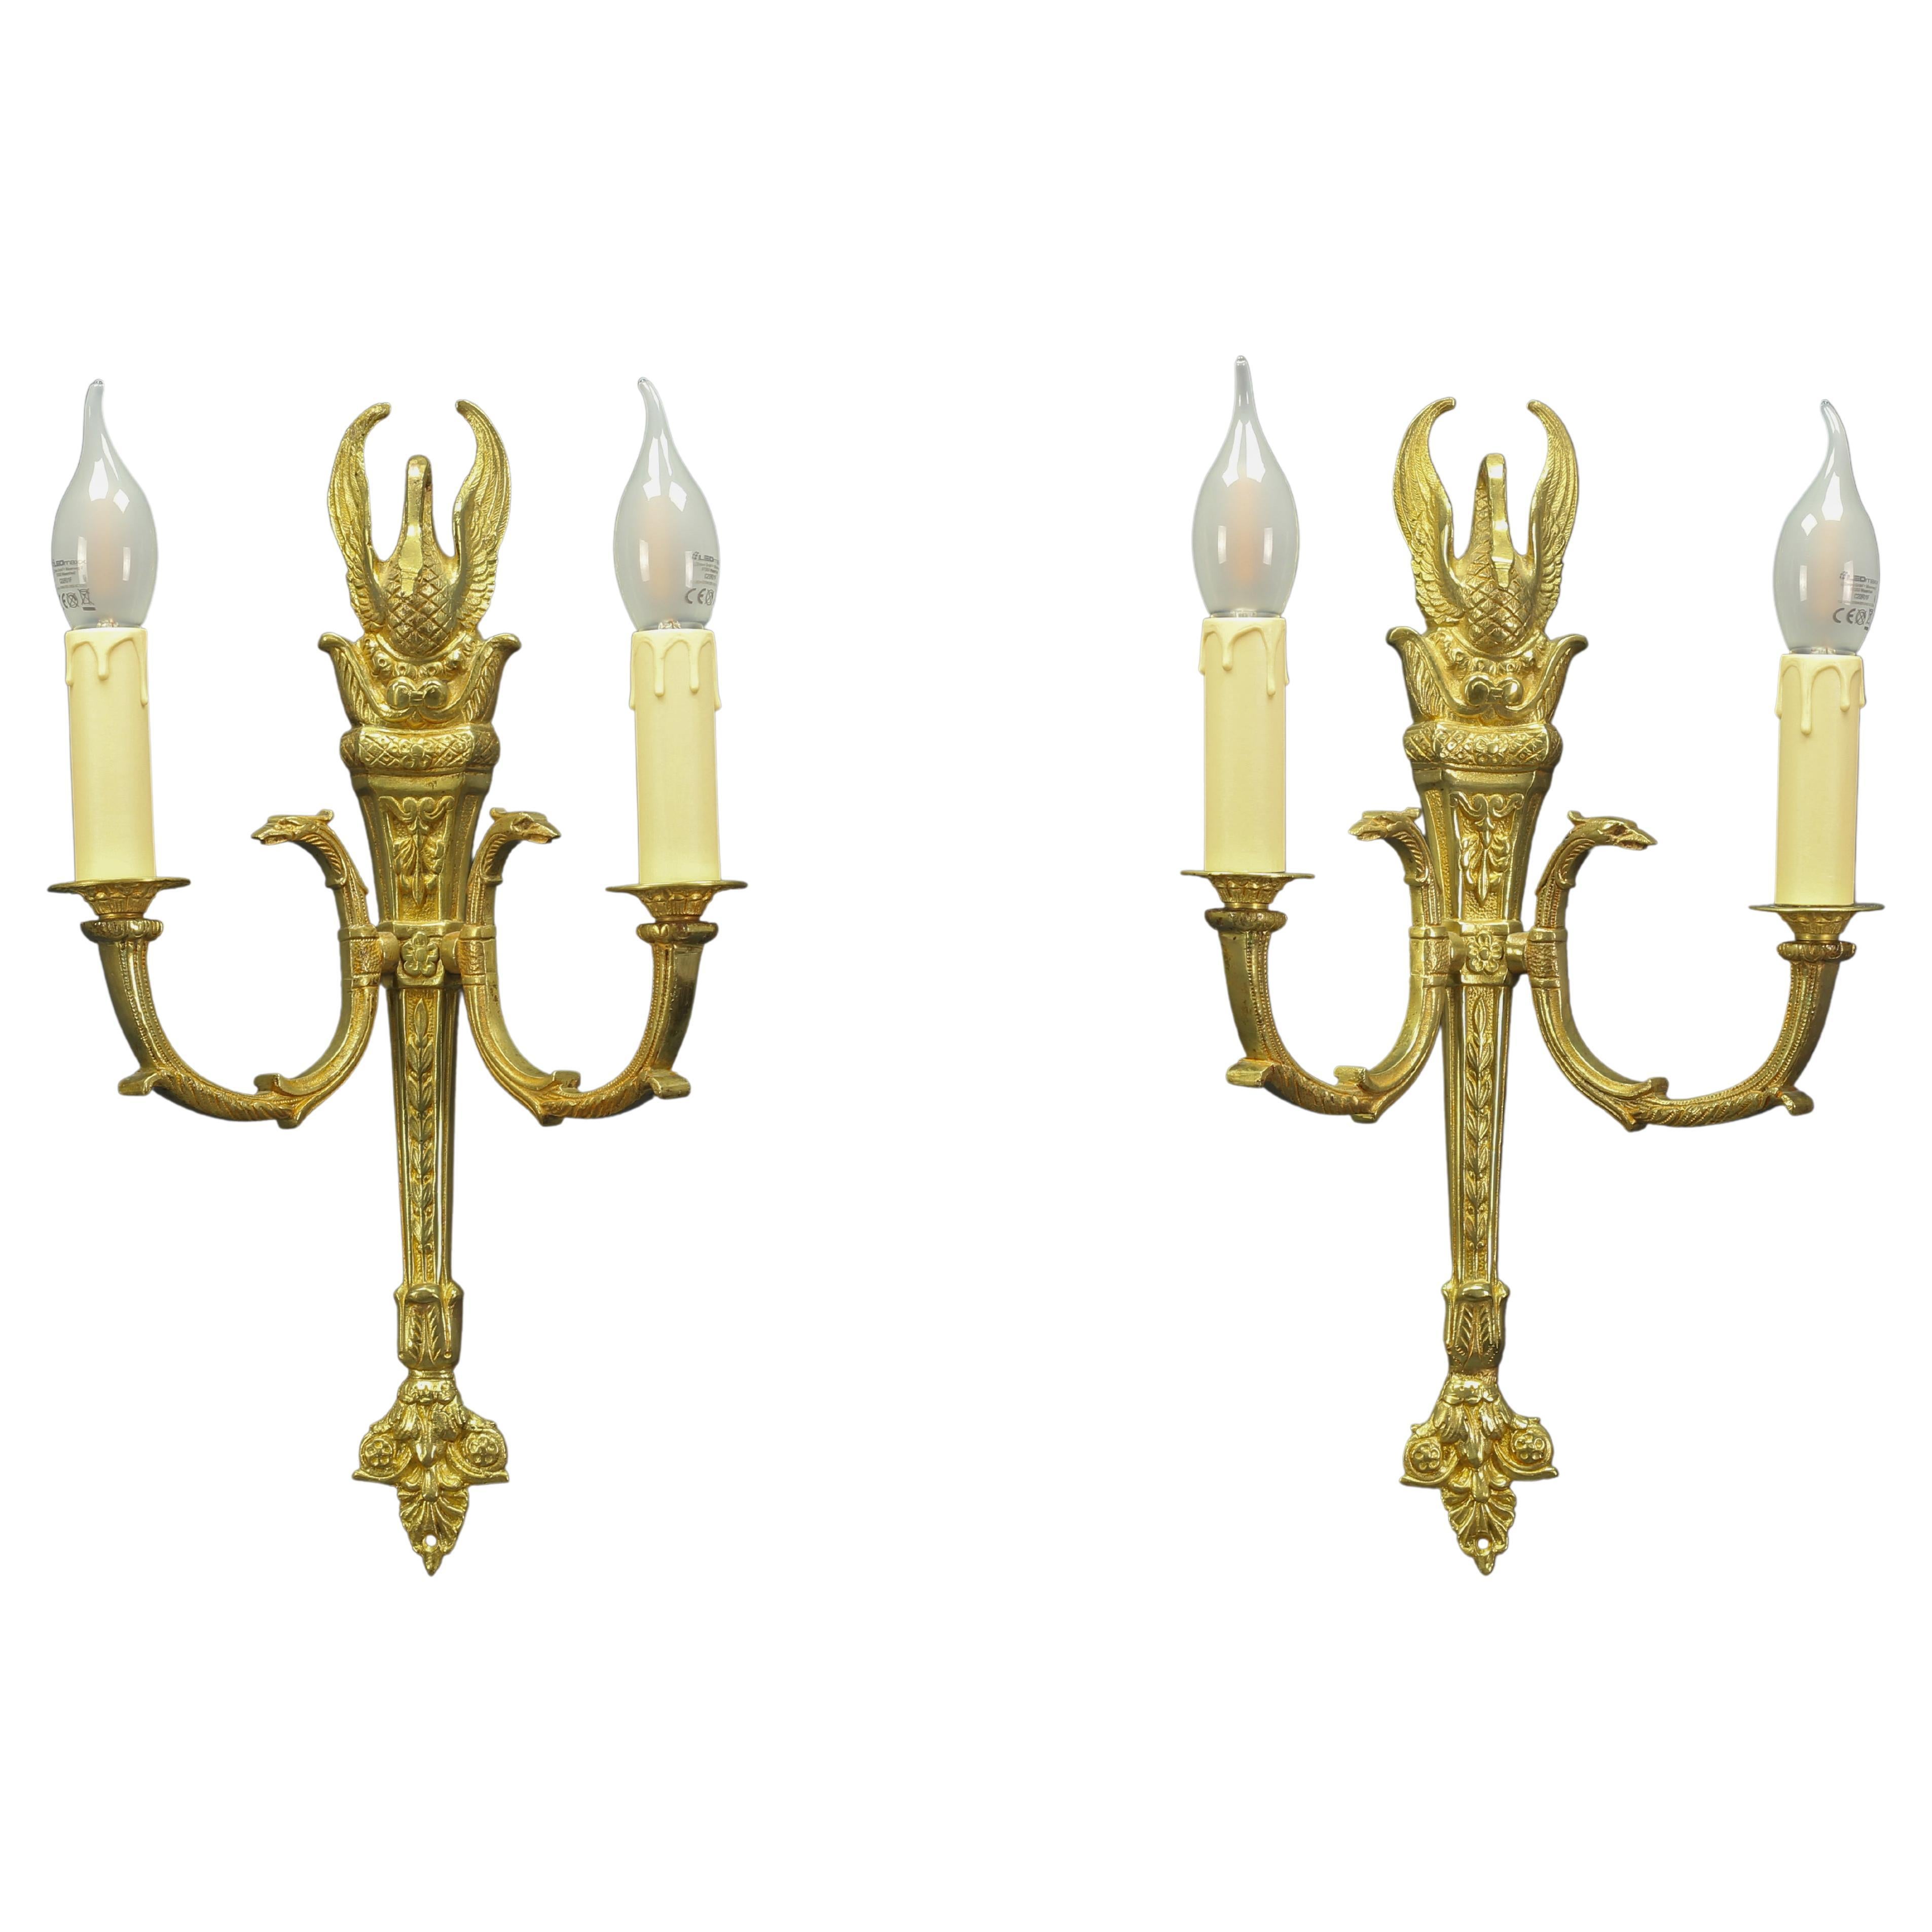 Pair of French Empire Style Gilt Bronze Two-Light Sconces, Early 20th Century For Sale